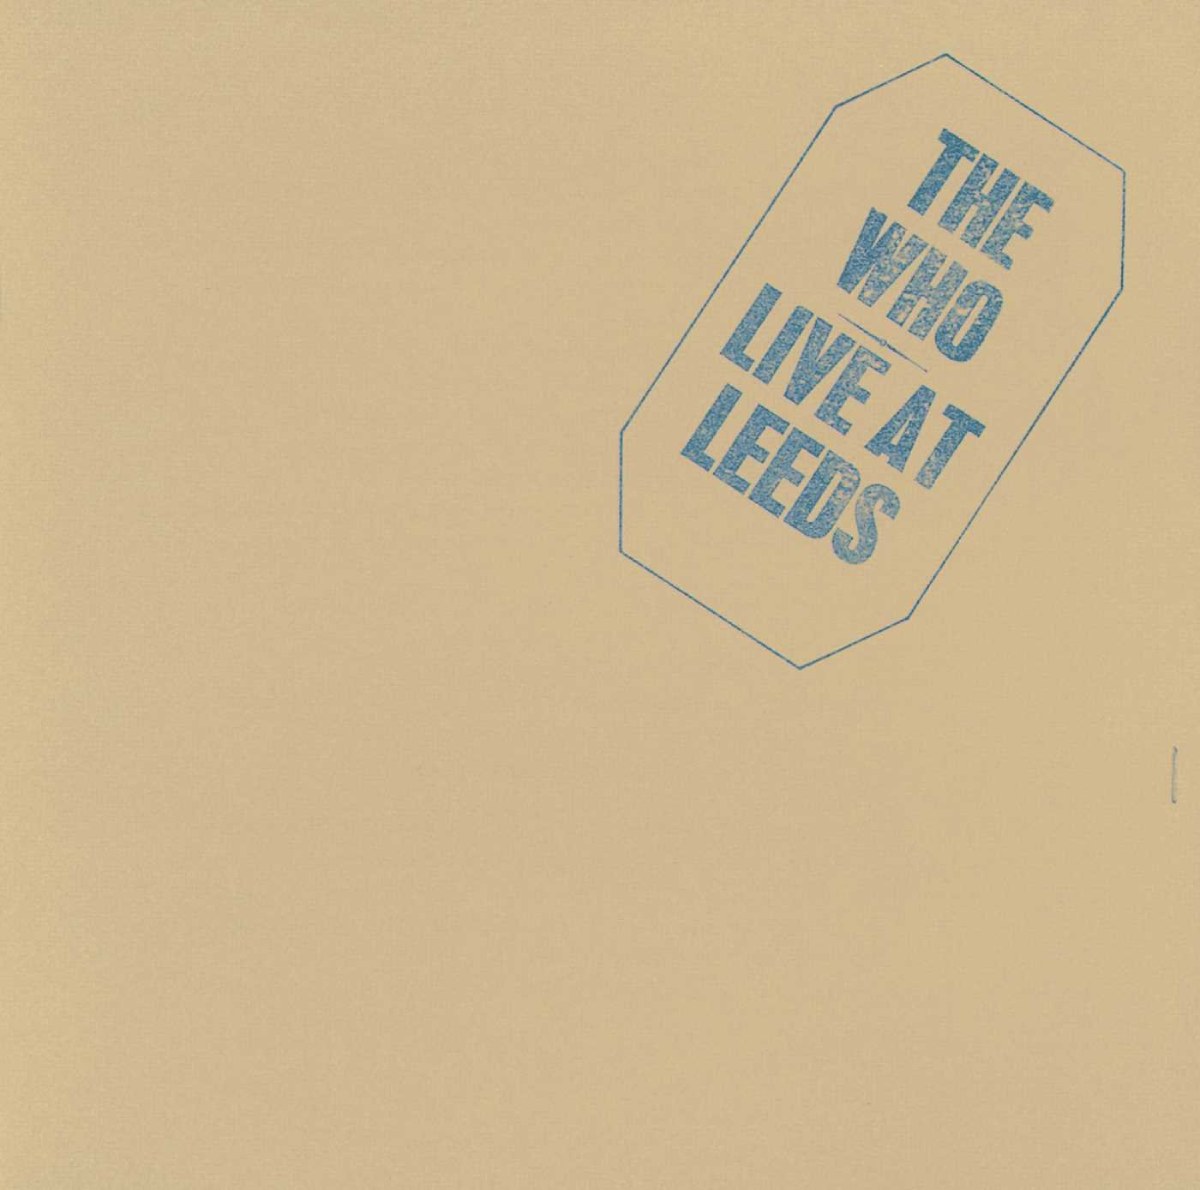 The Who - Live At Leeds (1970)